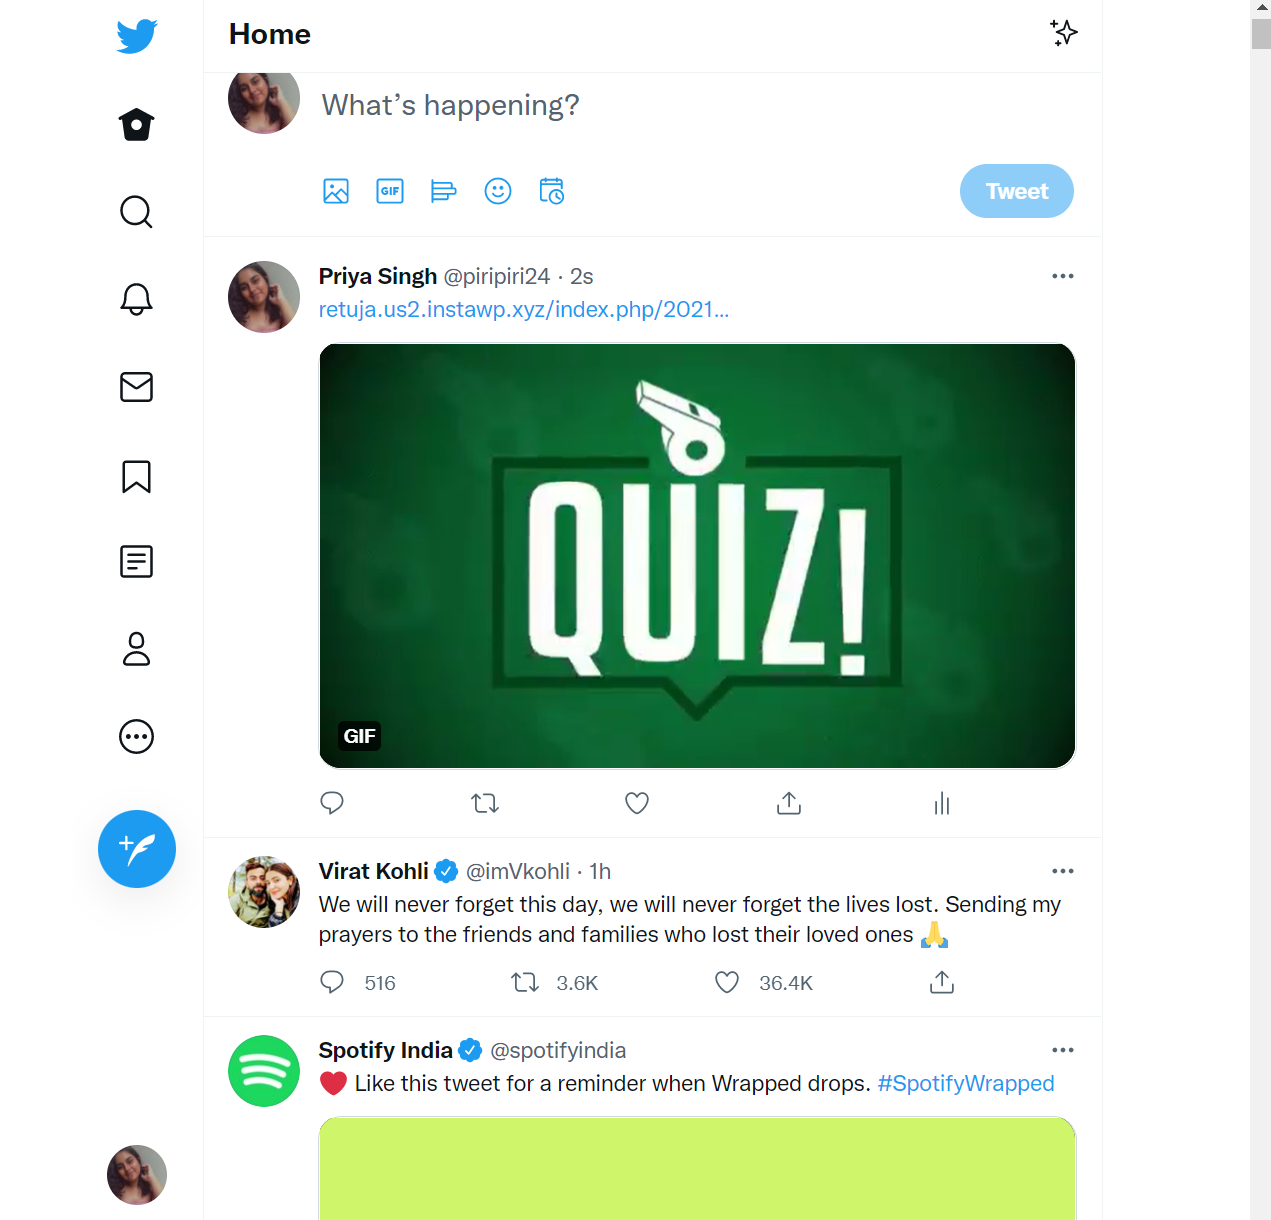 How to make a quiz on Twitter- Quiz posted